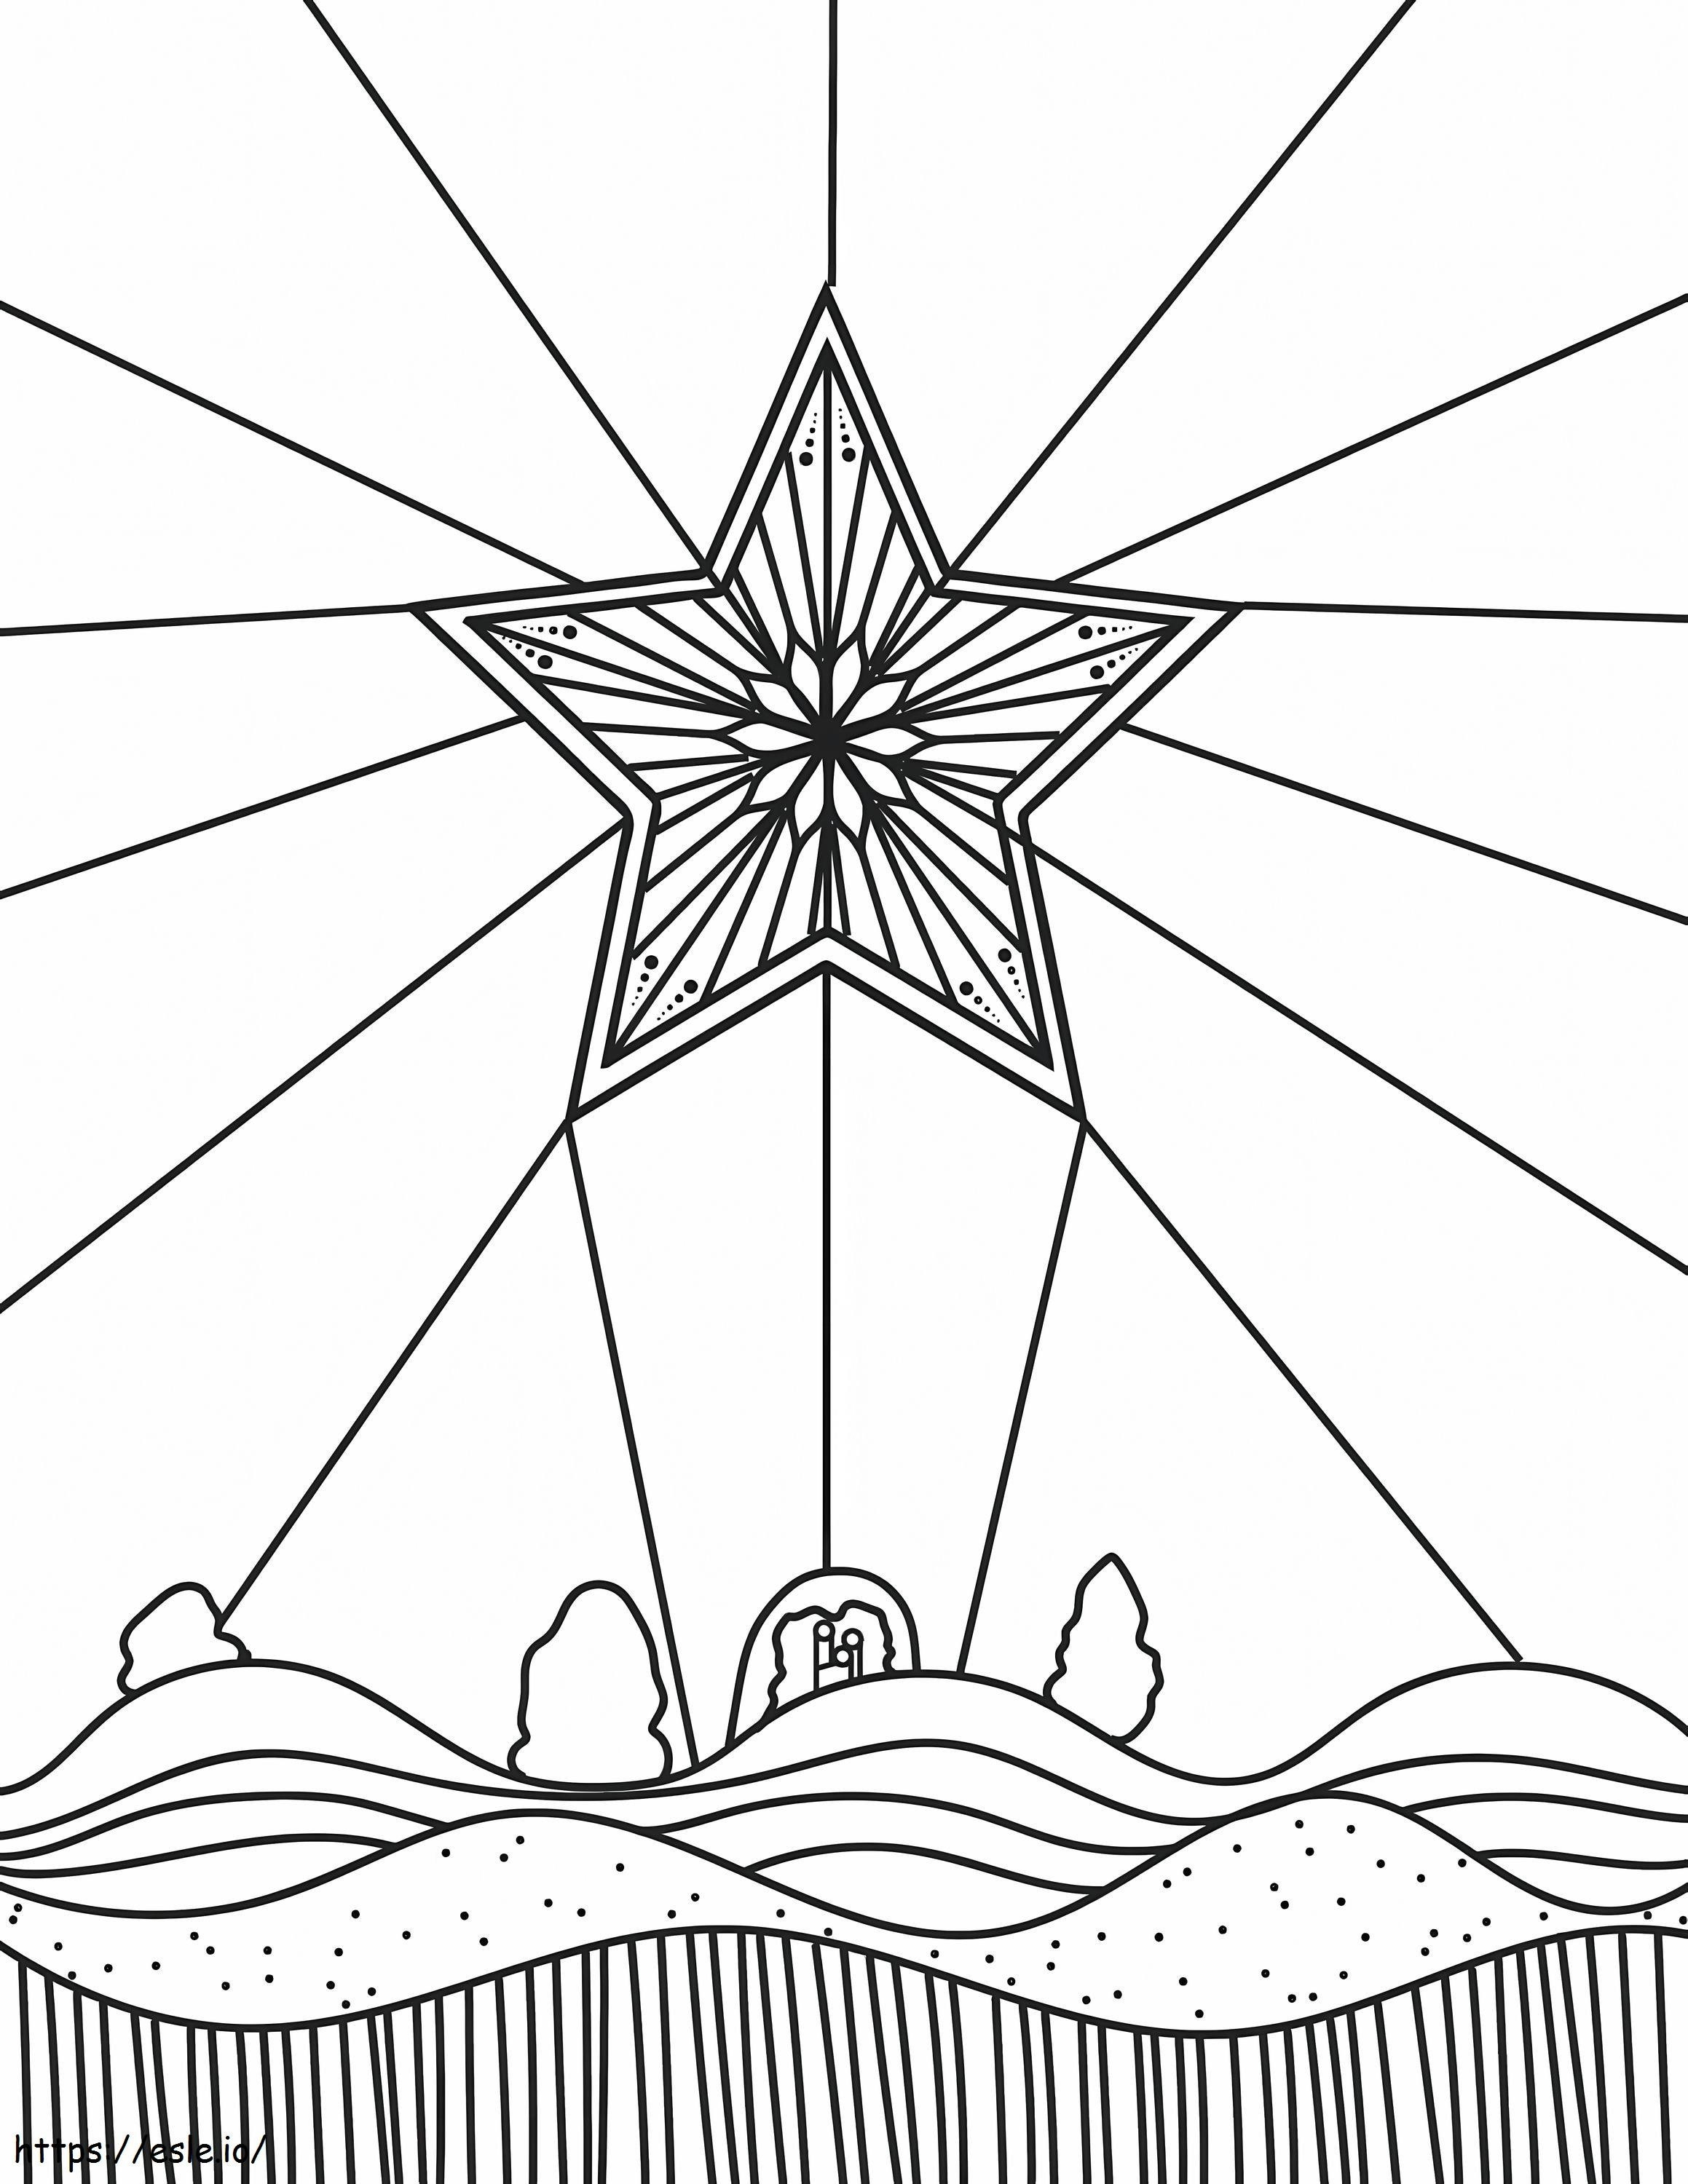 Winter Solstice Star coloring page